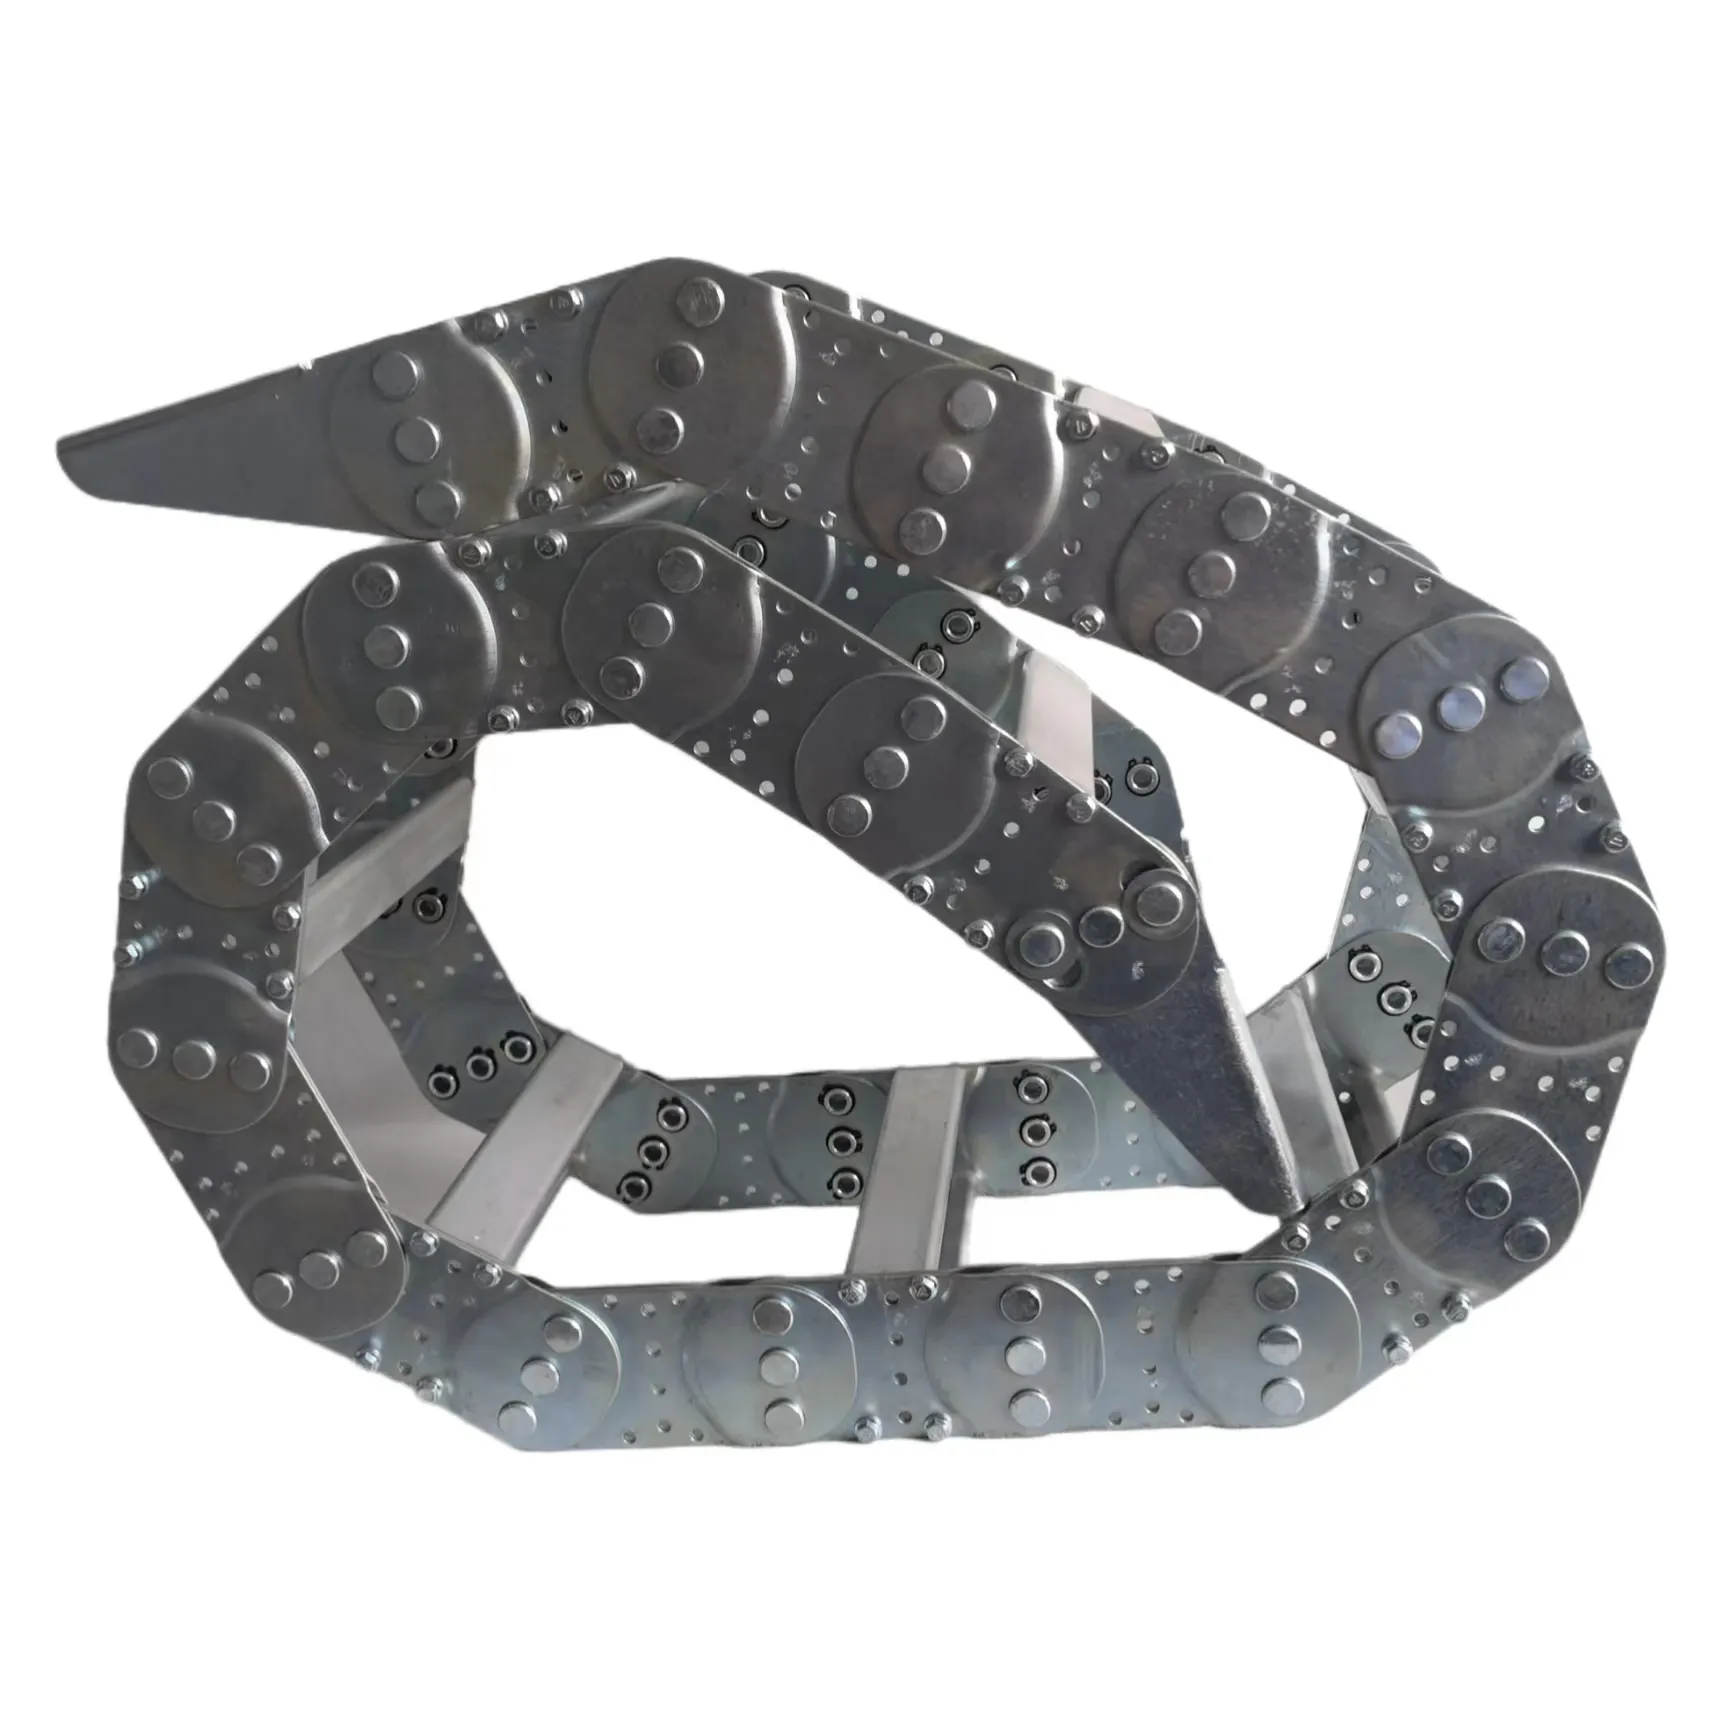 Bridge type stainless steel electric cable drag chain for cnc machine